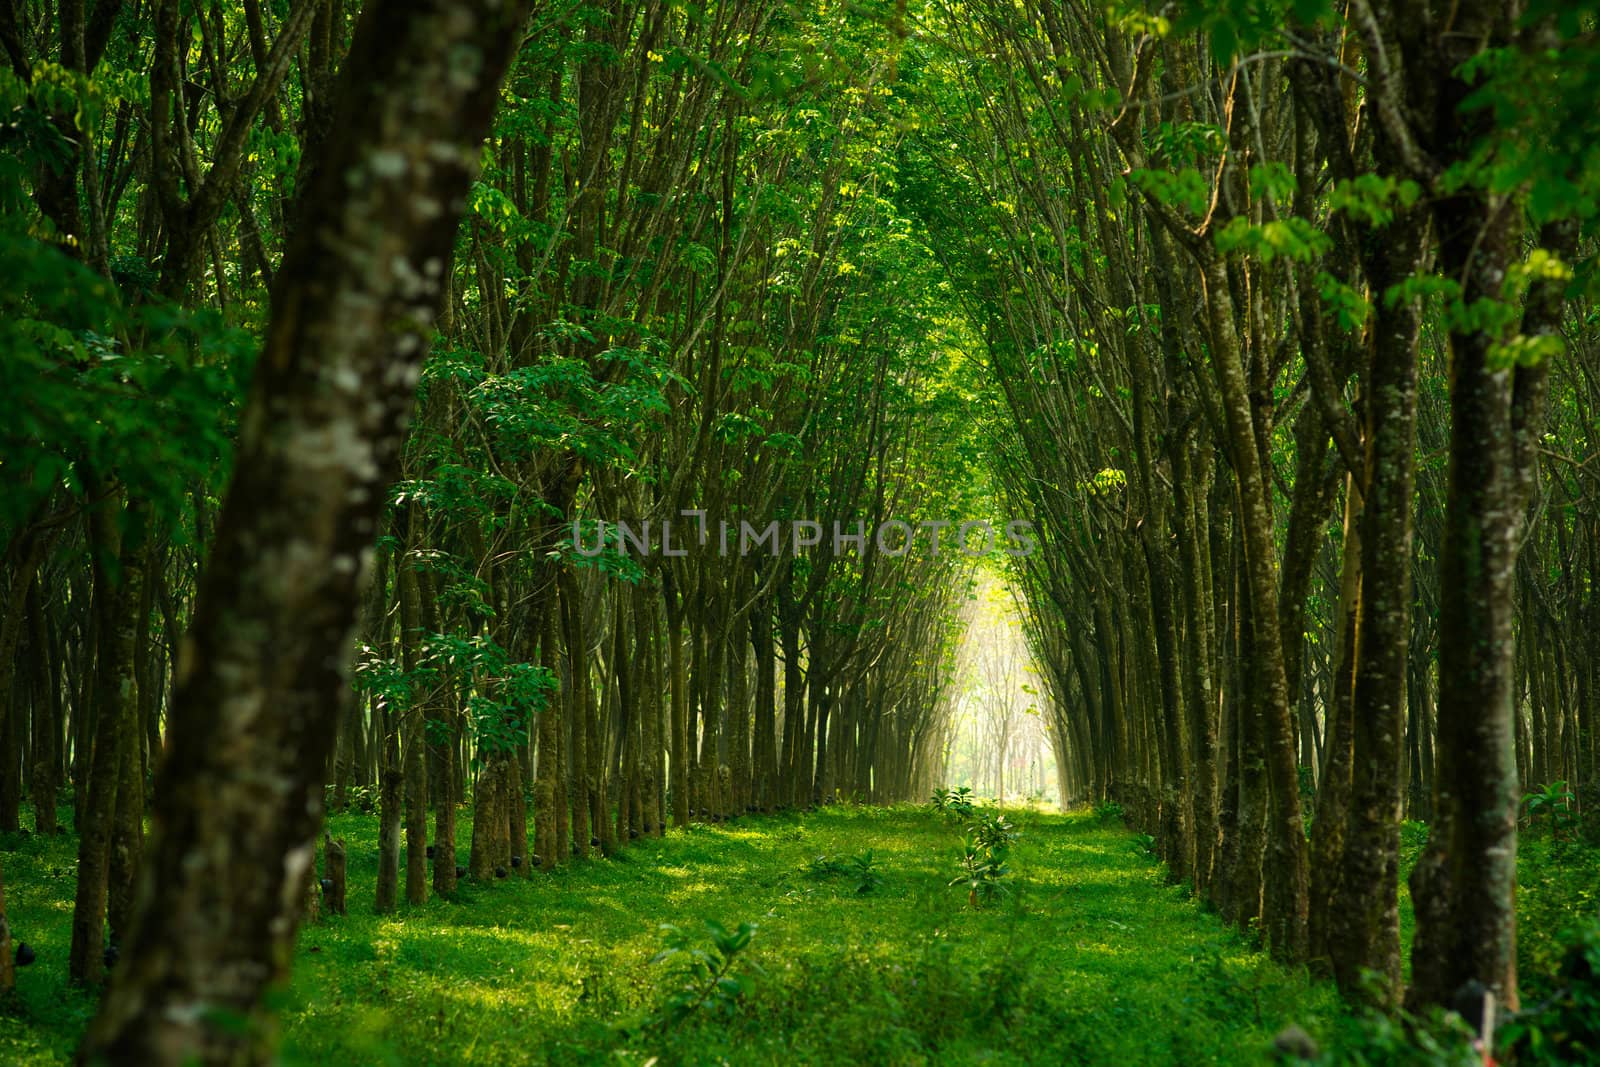 Plantation of rubber trees in Thailand